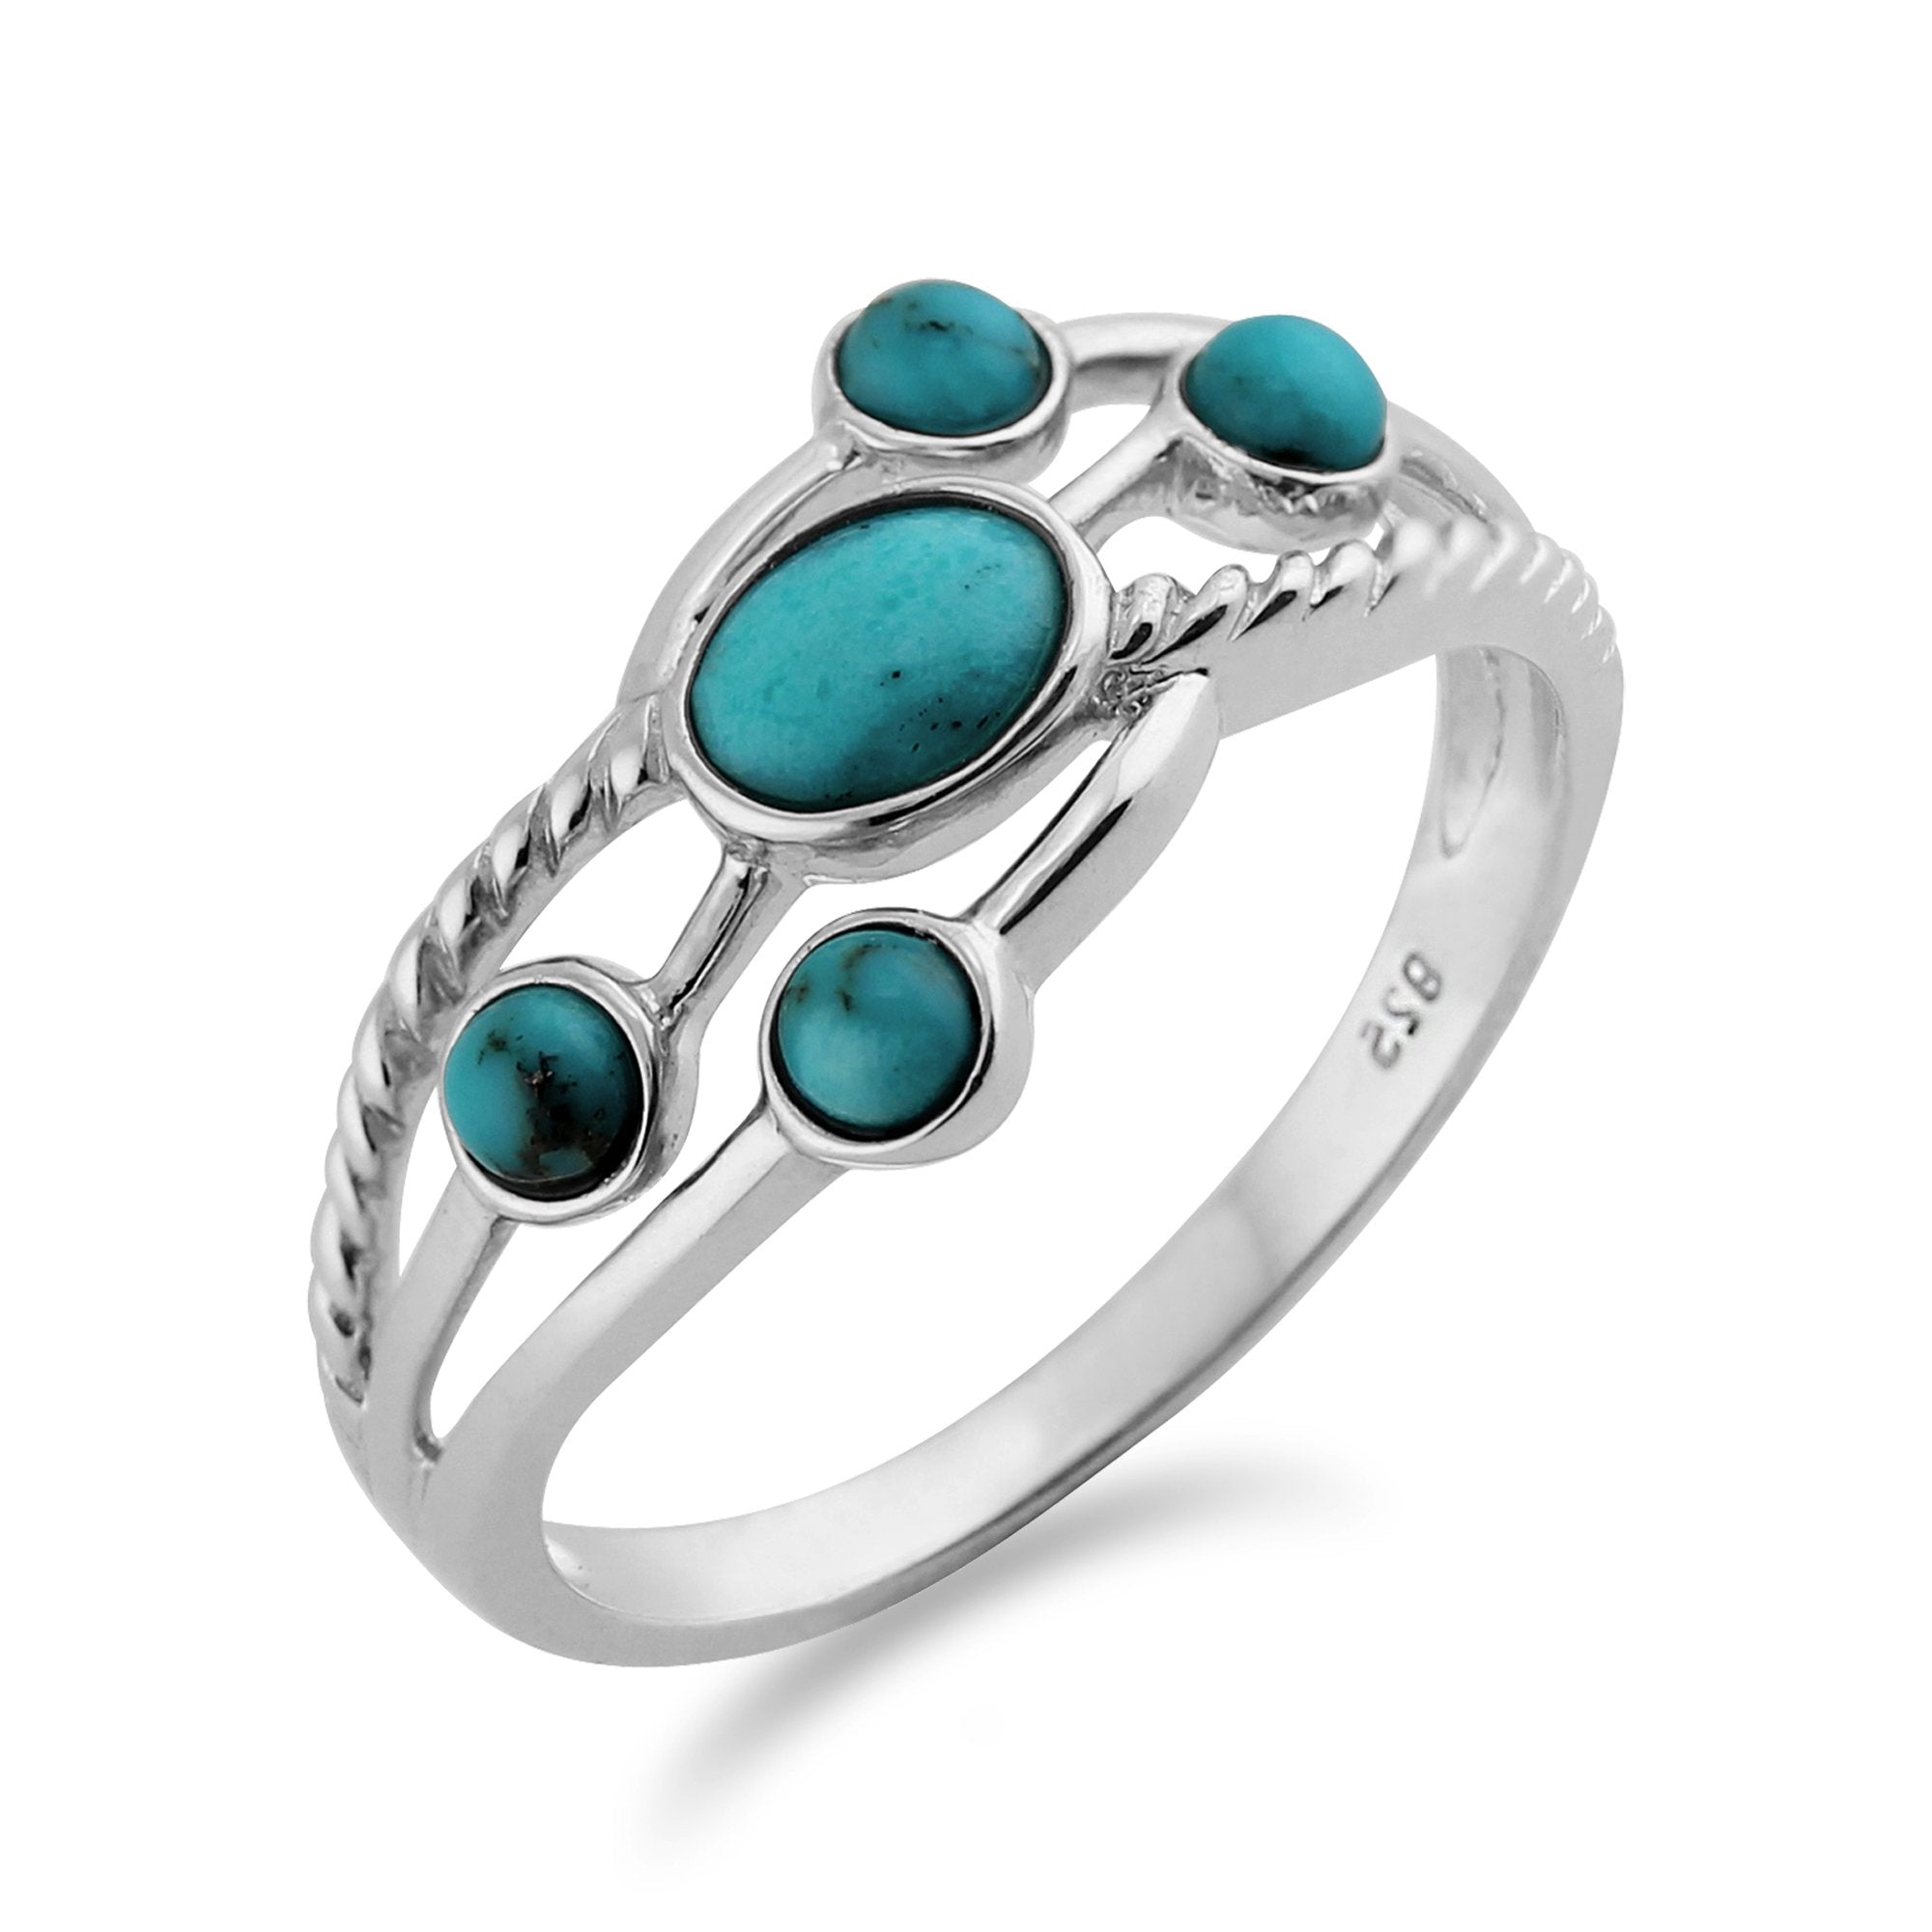 Contemporary Oval Turquoise Cabochon Five Stone Ring in 925 Sterling Silver